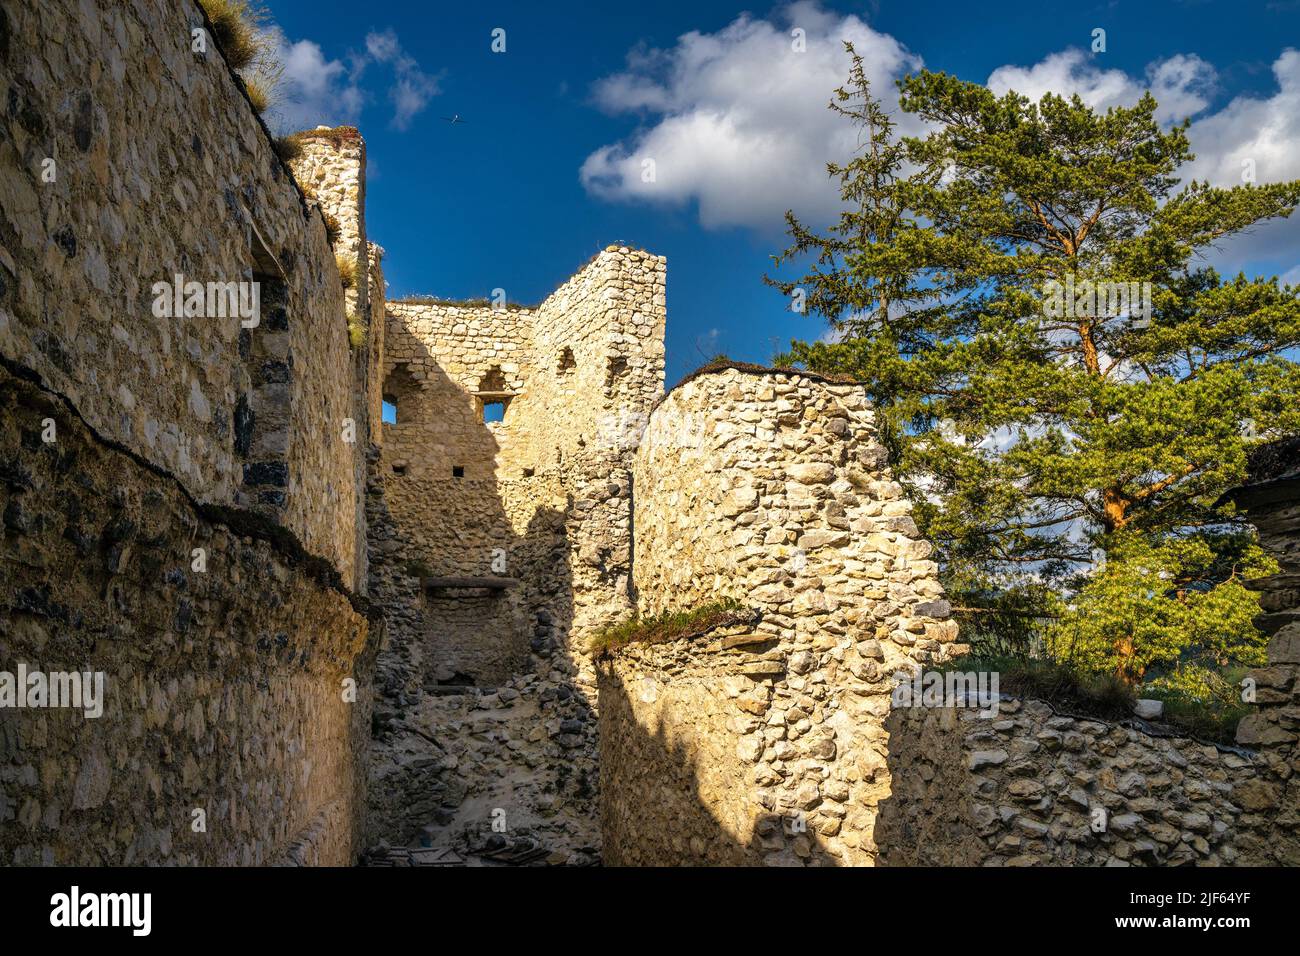 The Blatnica Castle, ruins of a medieval carpathian castle in north of Slovakia, Europe. Stock Photo